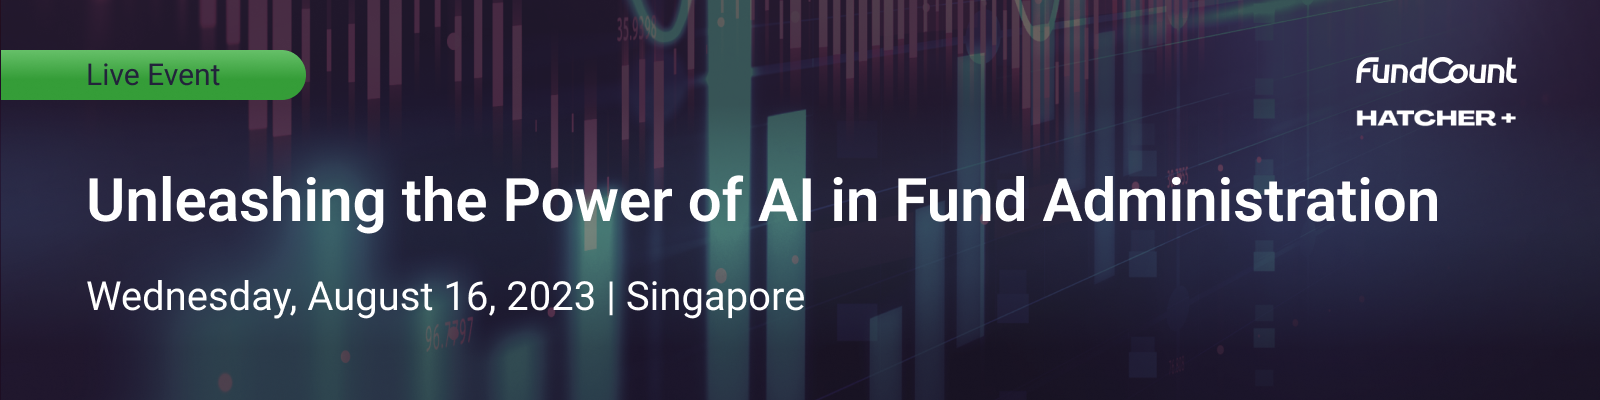 Unleashing the Power of AI in Fund Administration